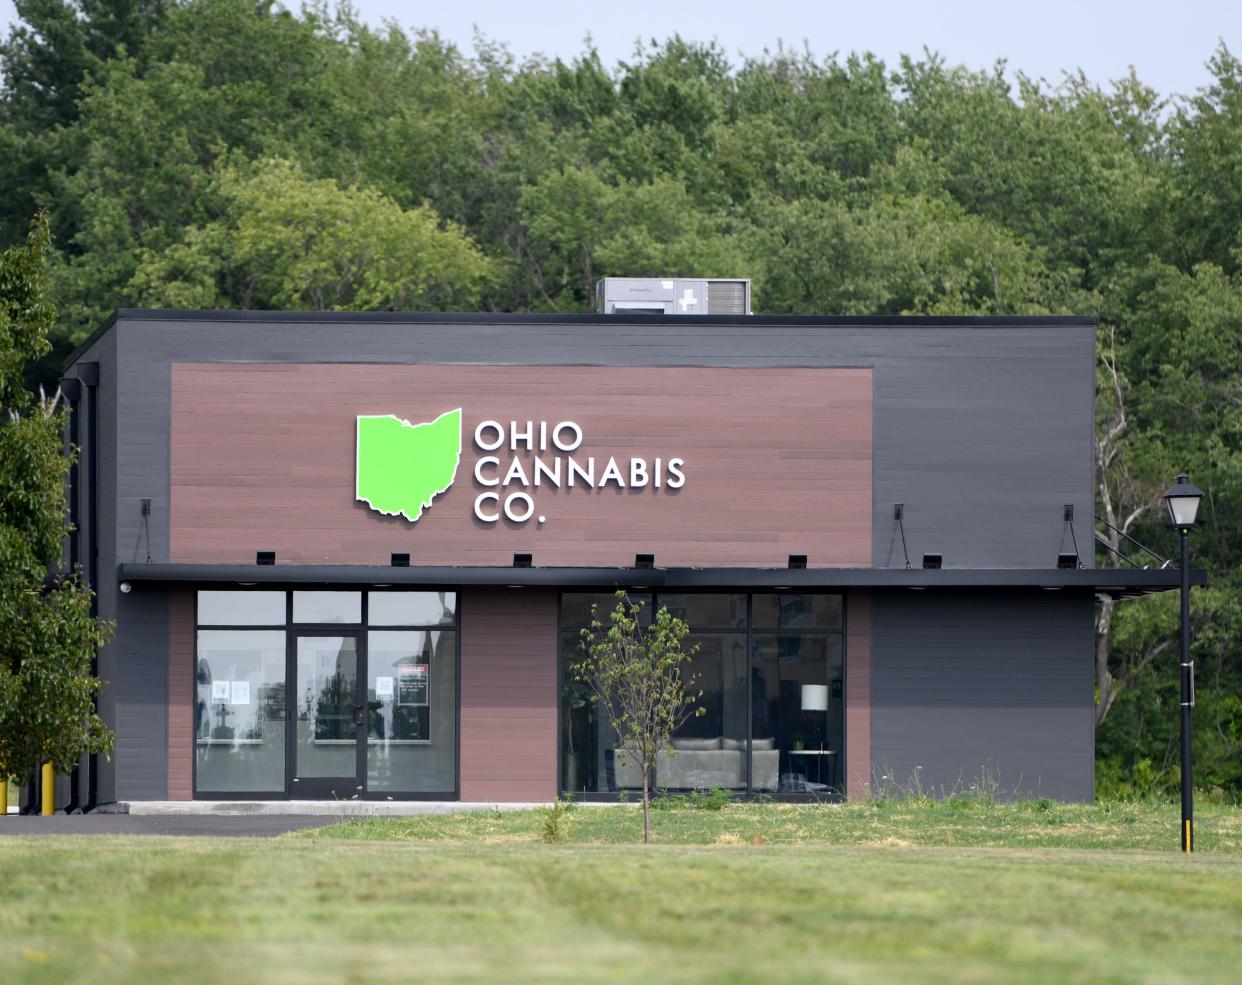 The Ohio Cannabis Co. medical marijuana dispensary at 4016 Greentree Ave. SW in Canton was among the first to receive a provisional dual-use license and remains the only local business awarded one, according to the state's online database.